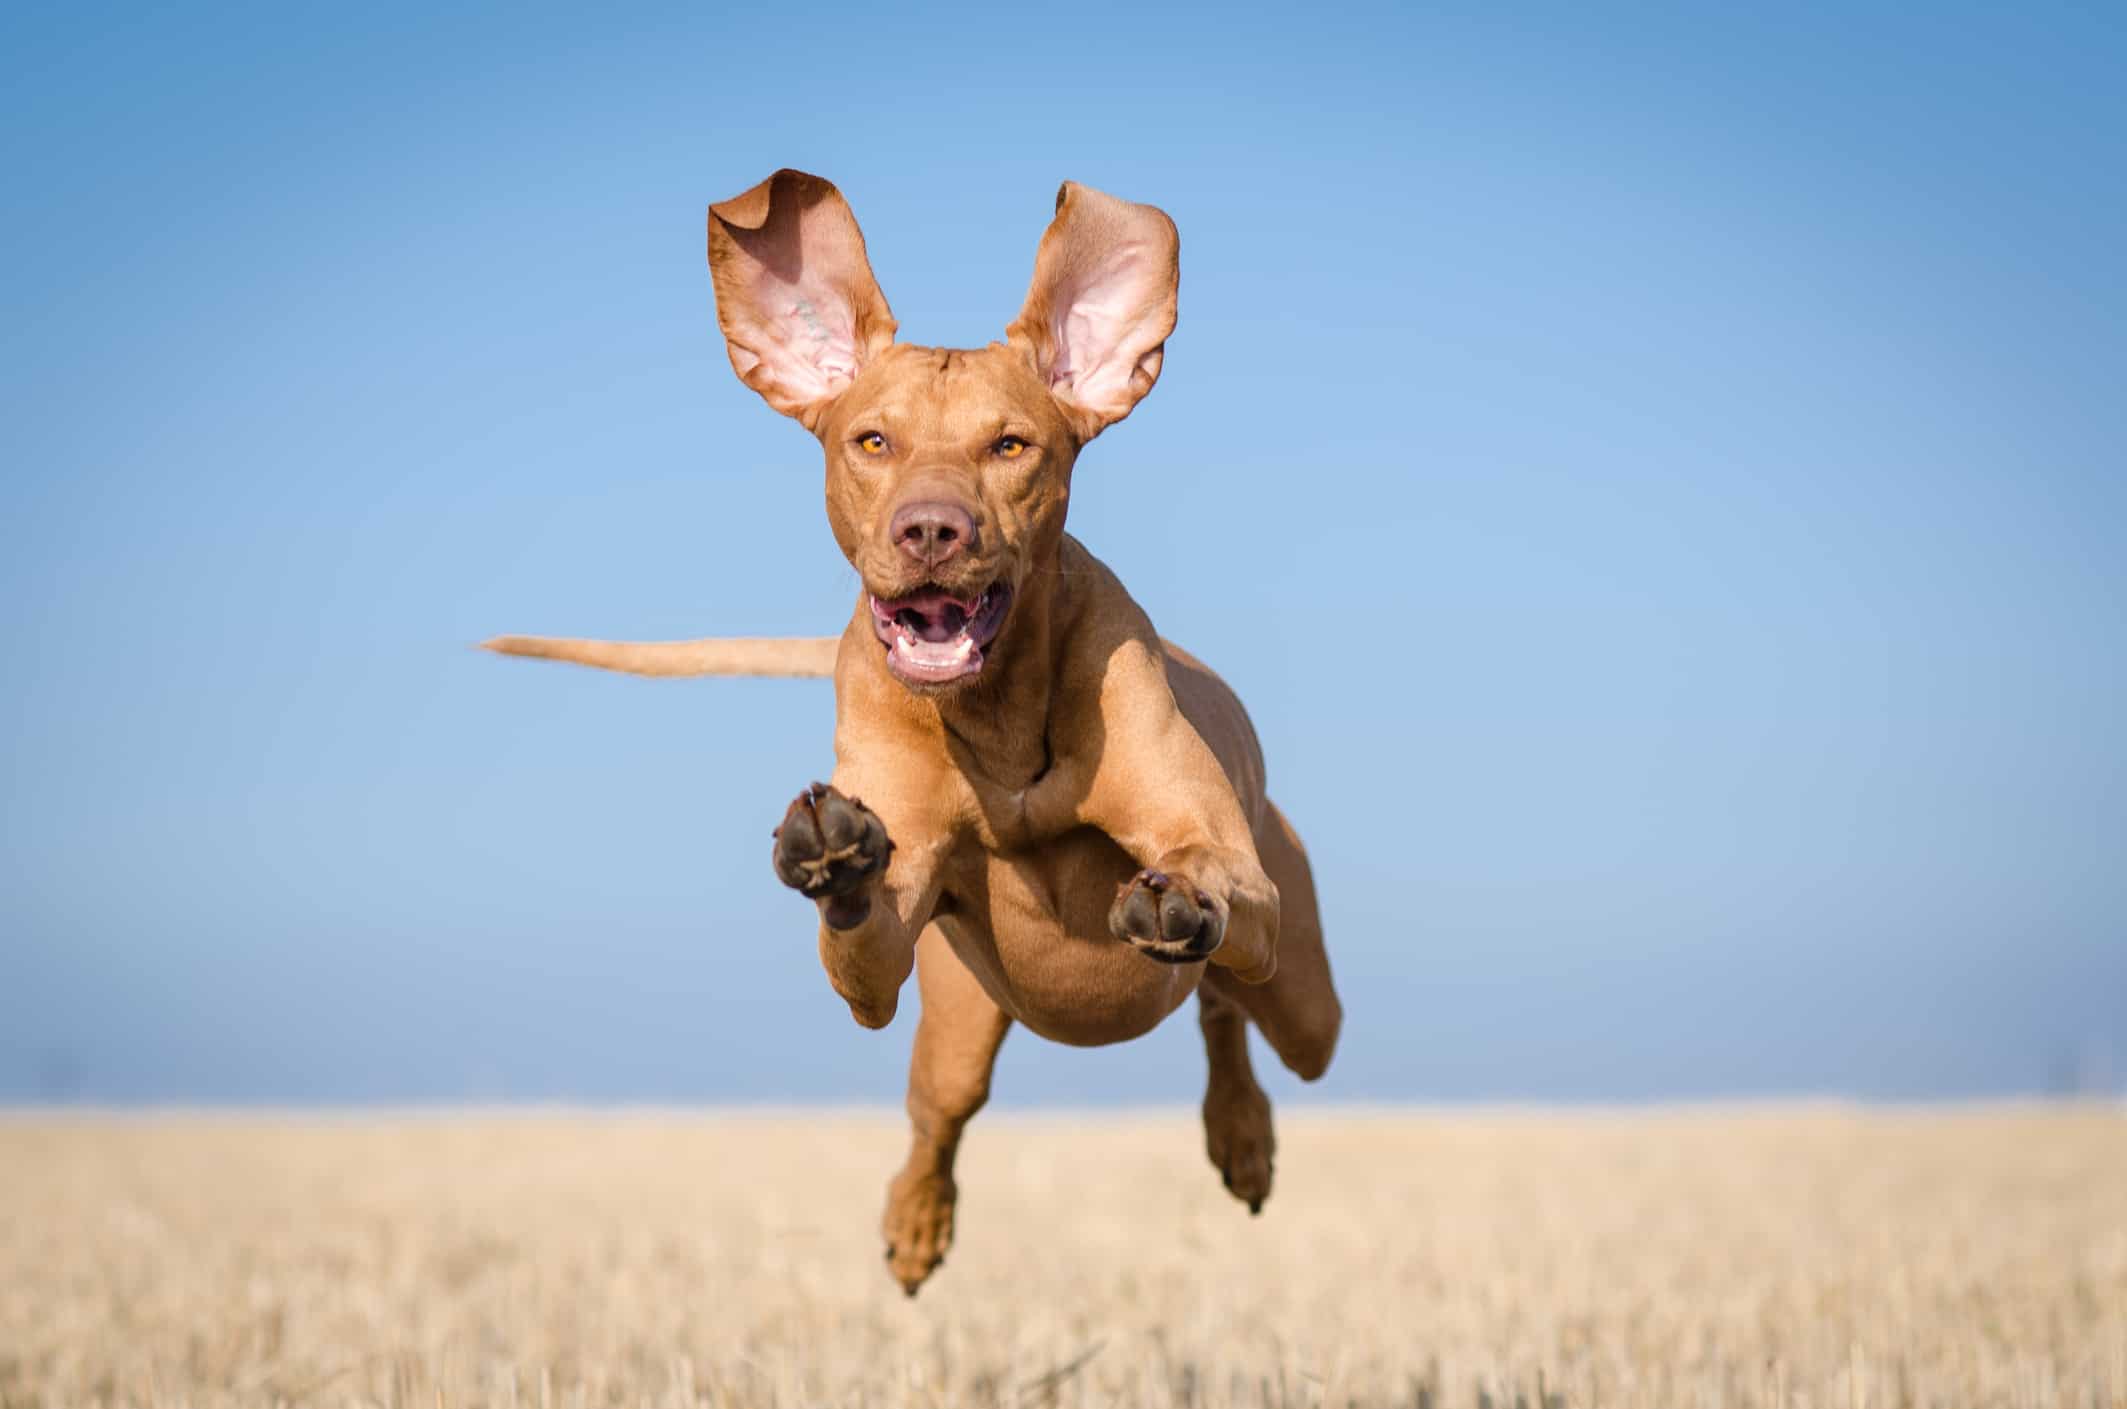 15 Of The Fastest Dog Breeds In The World | Highland Canine Training